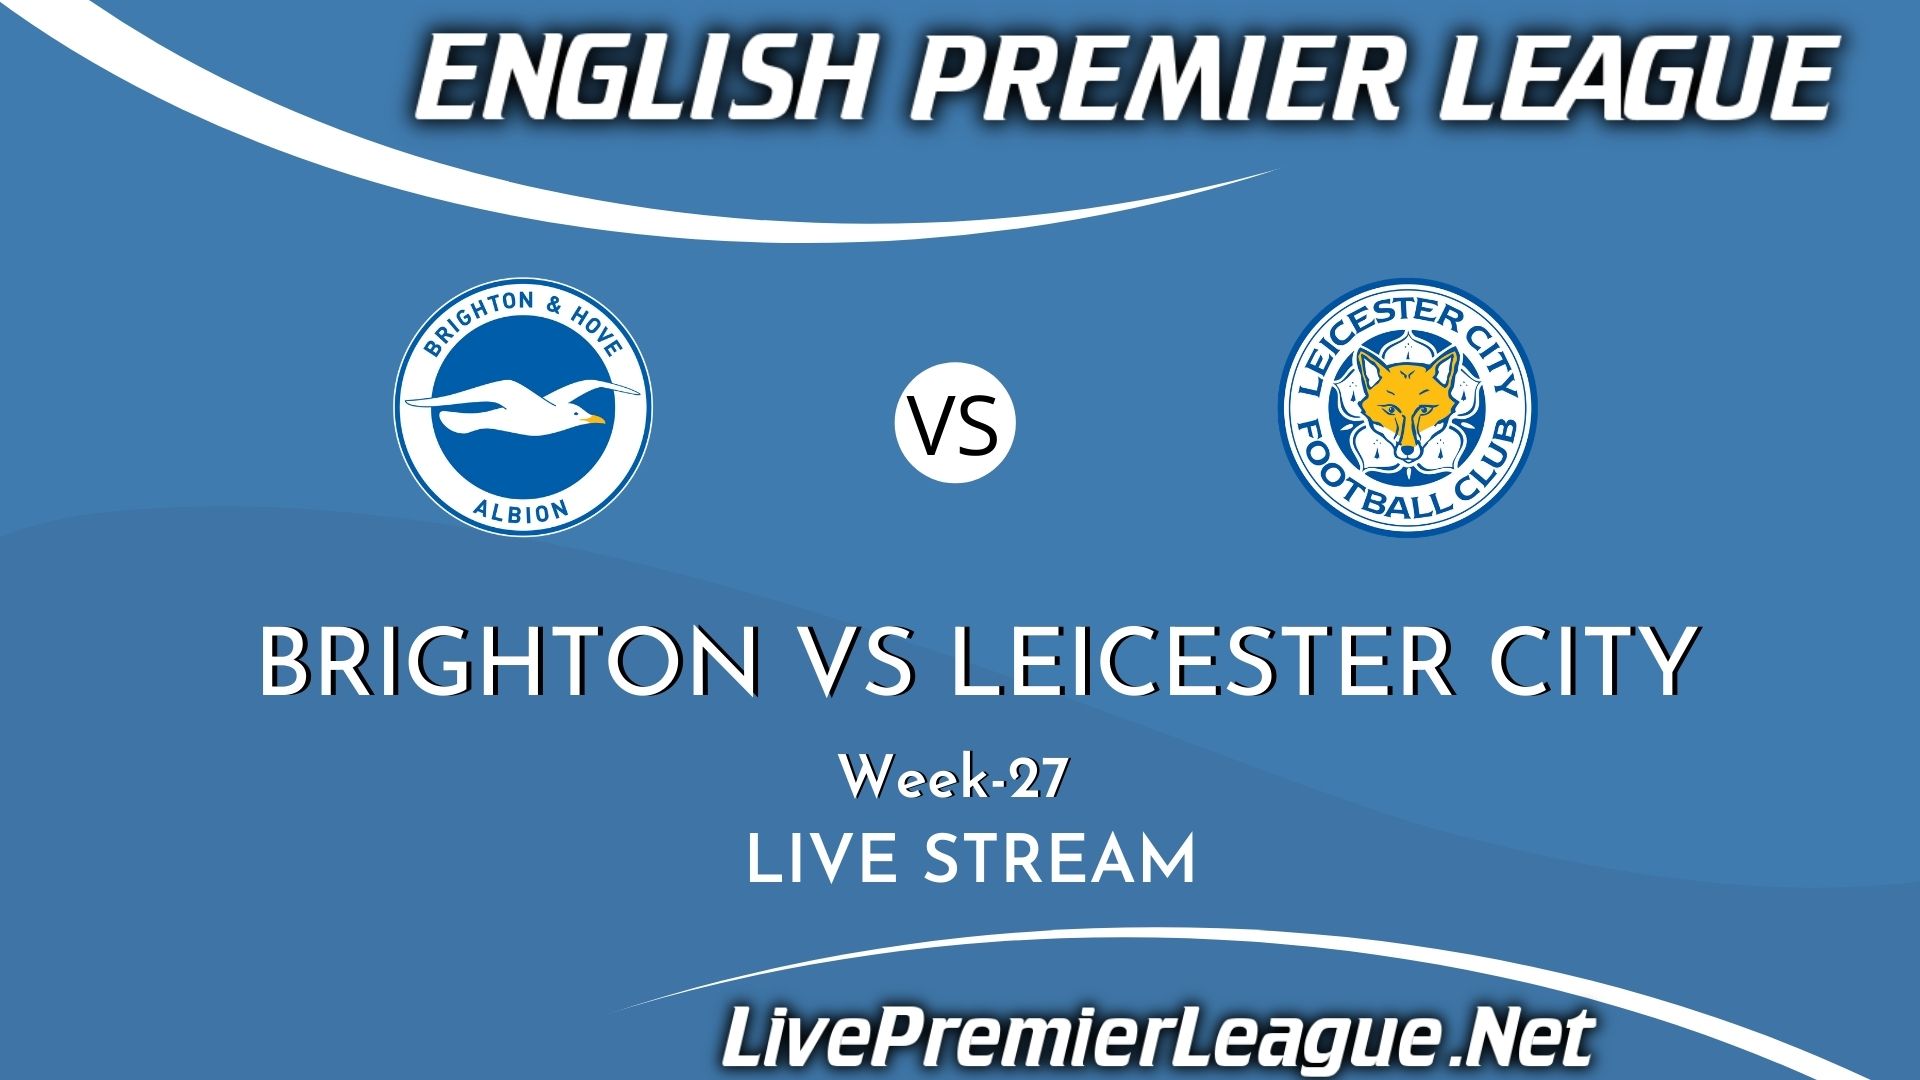 Brighton and Hove Albion Vs Leicester City Live Stream 2021 | Barclays Premier League Week 27